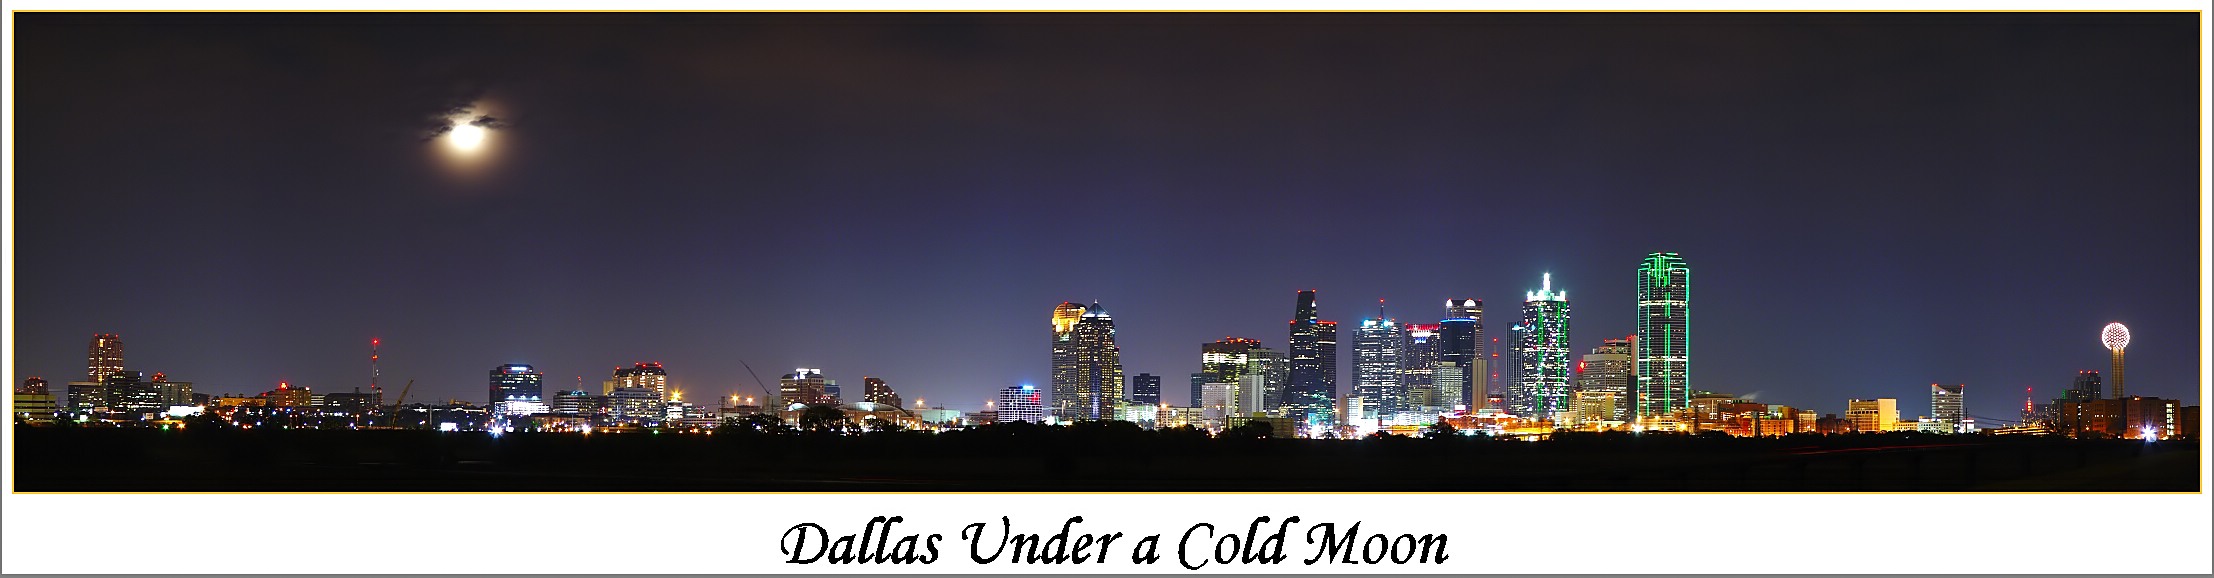 b>Dallas Under a Cold Moon</b><br><font size=1>by James Langford</font>